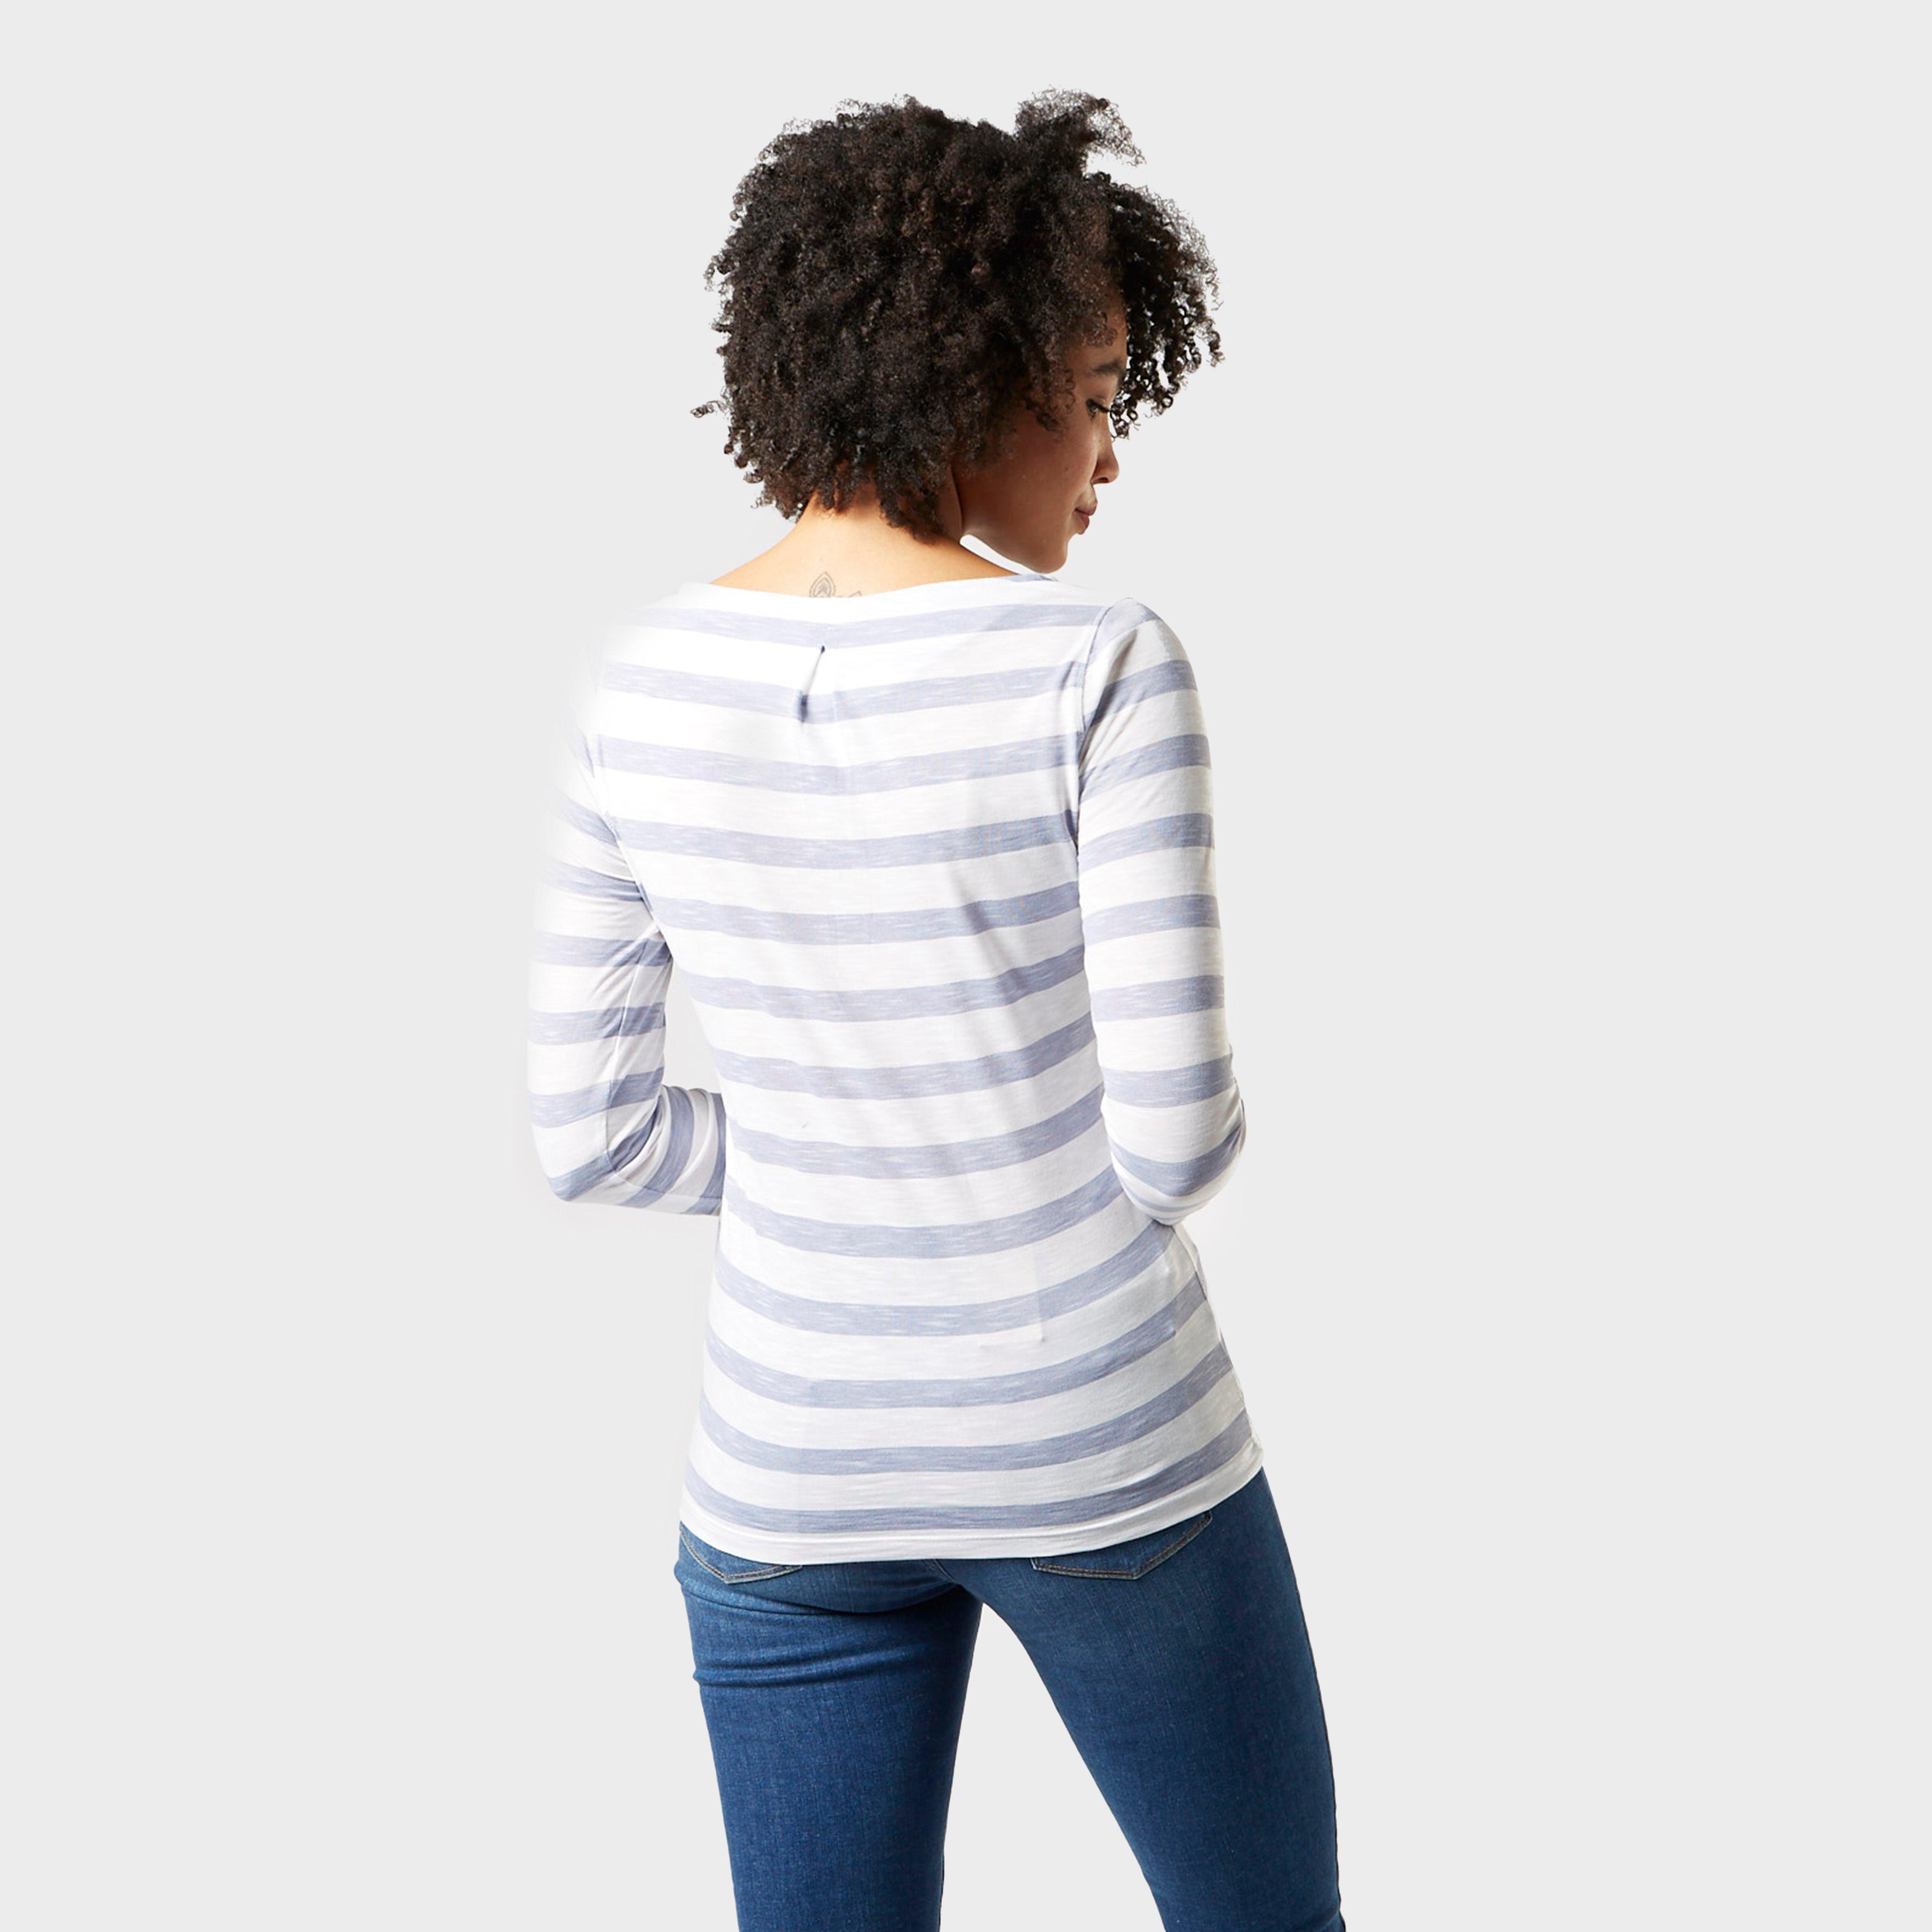 Craghoppers Women's Susie Long Sleeve Top Review